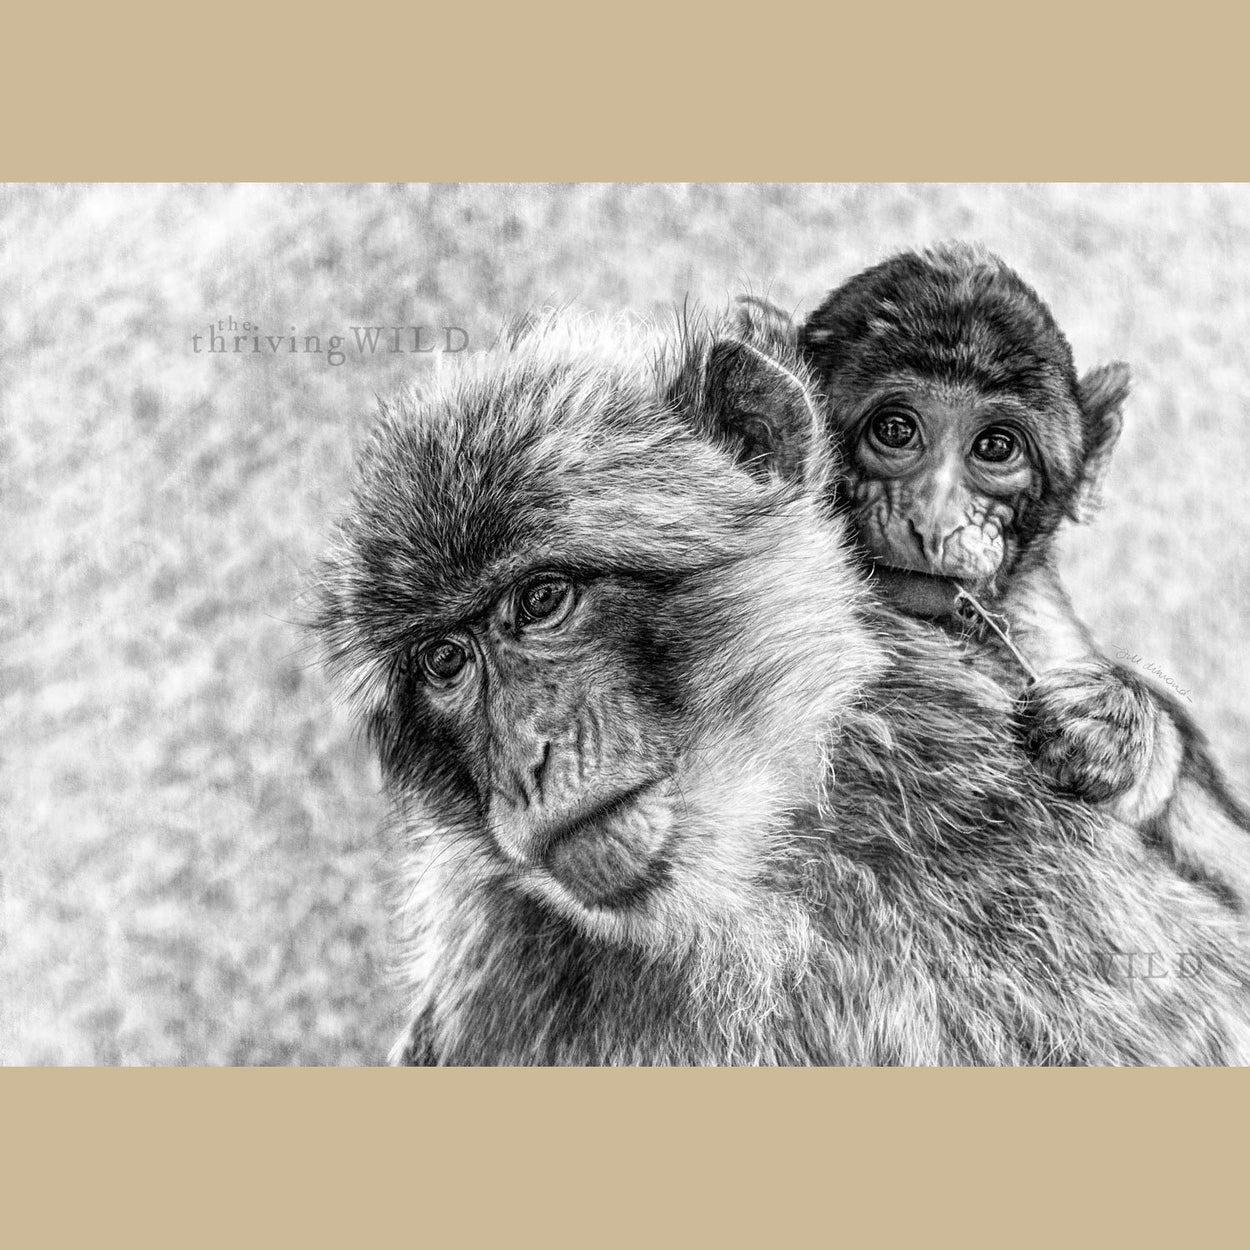 Macaques Mother & Baby Digital Drawing - The Thriving Wild